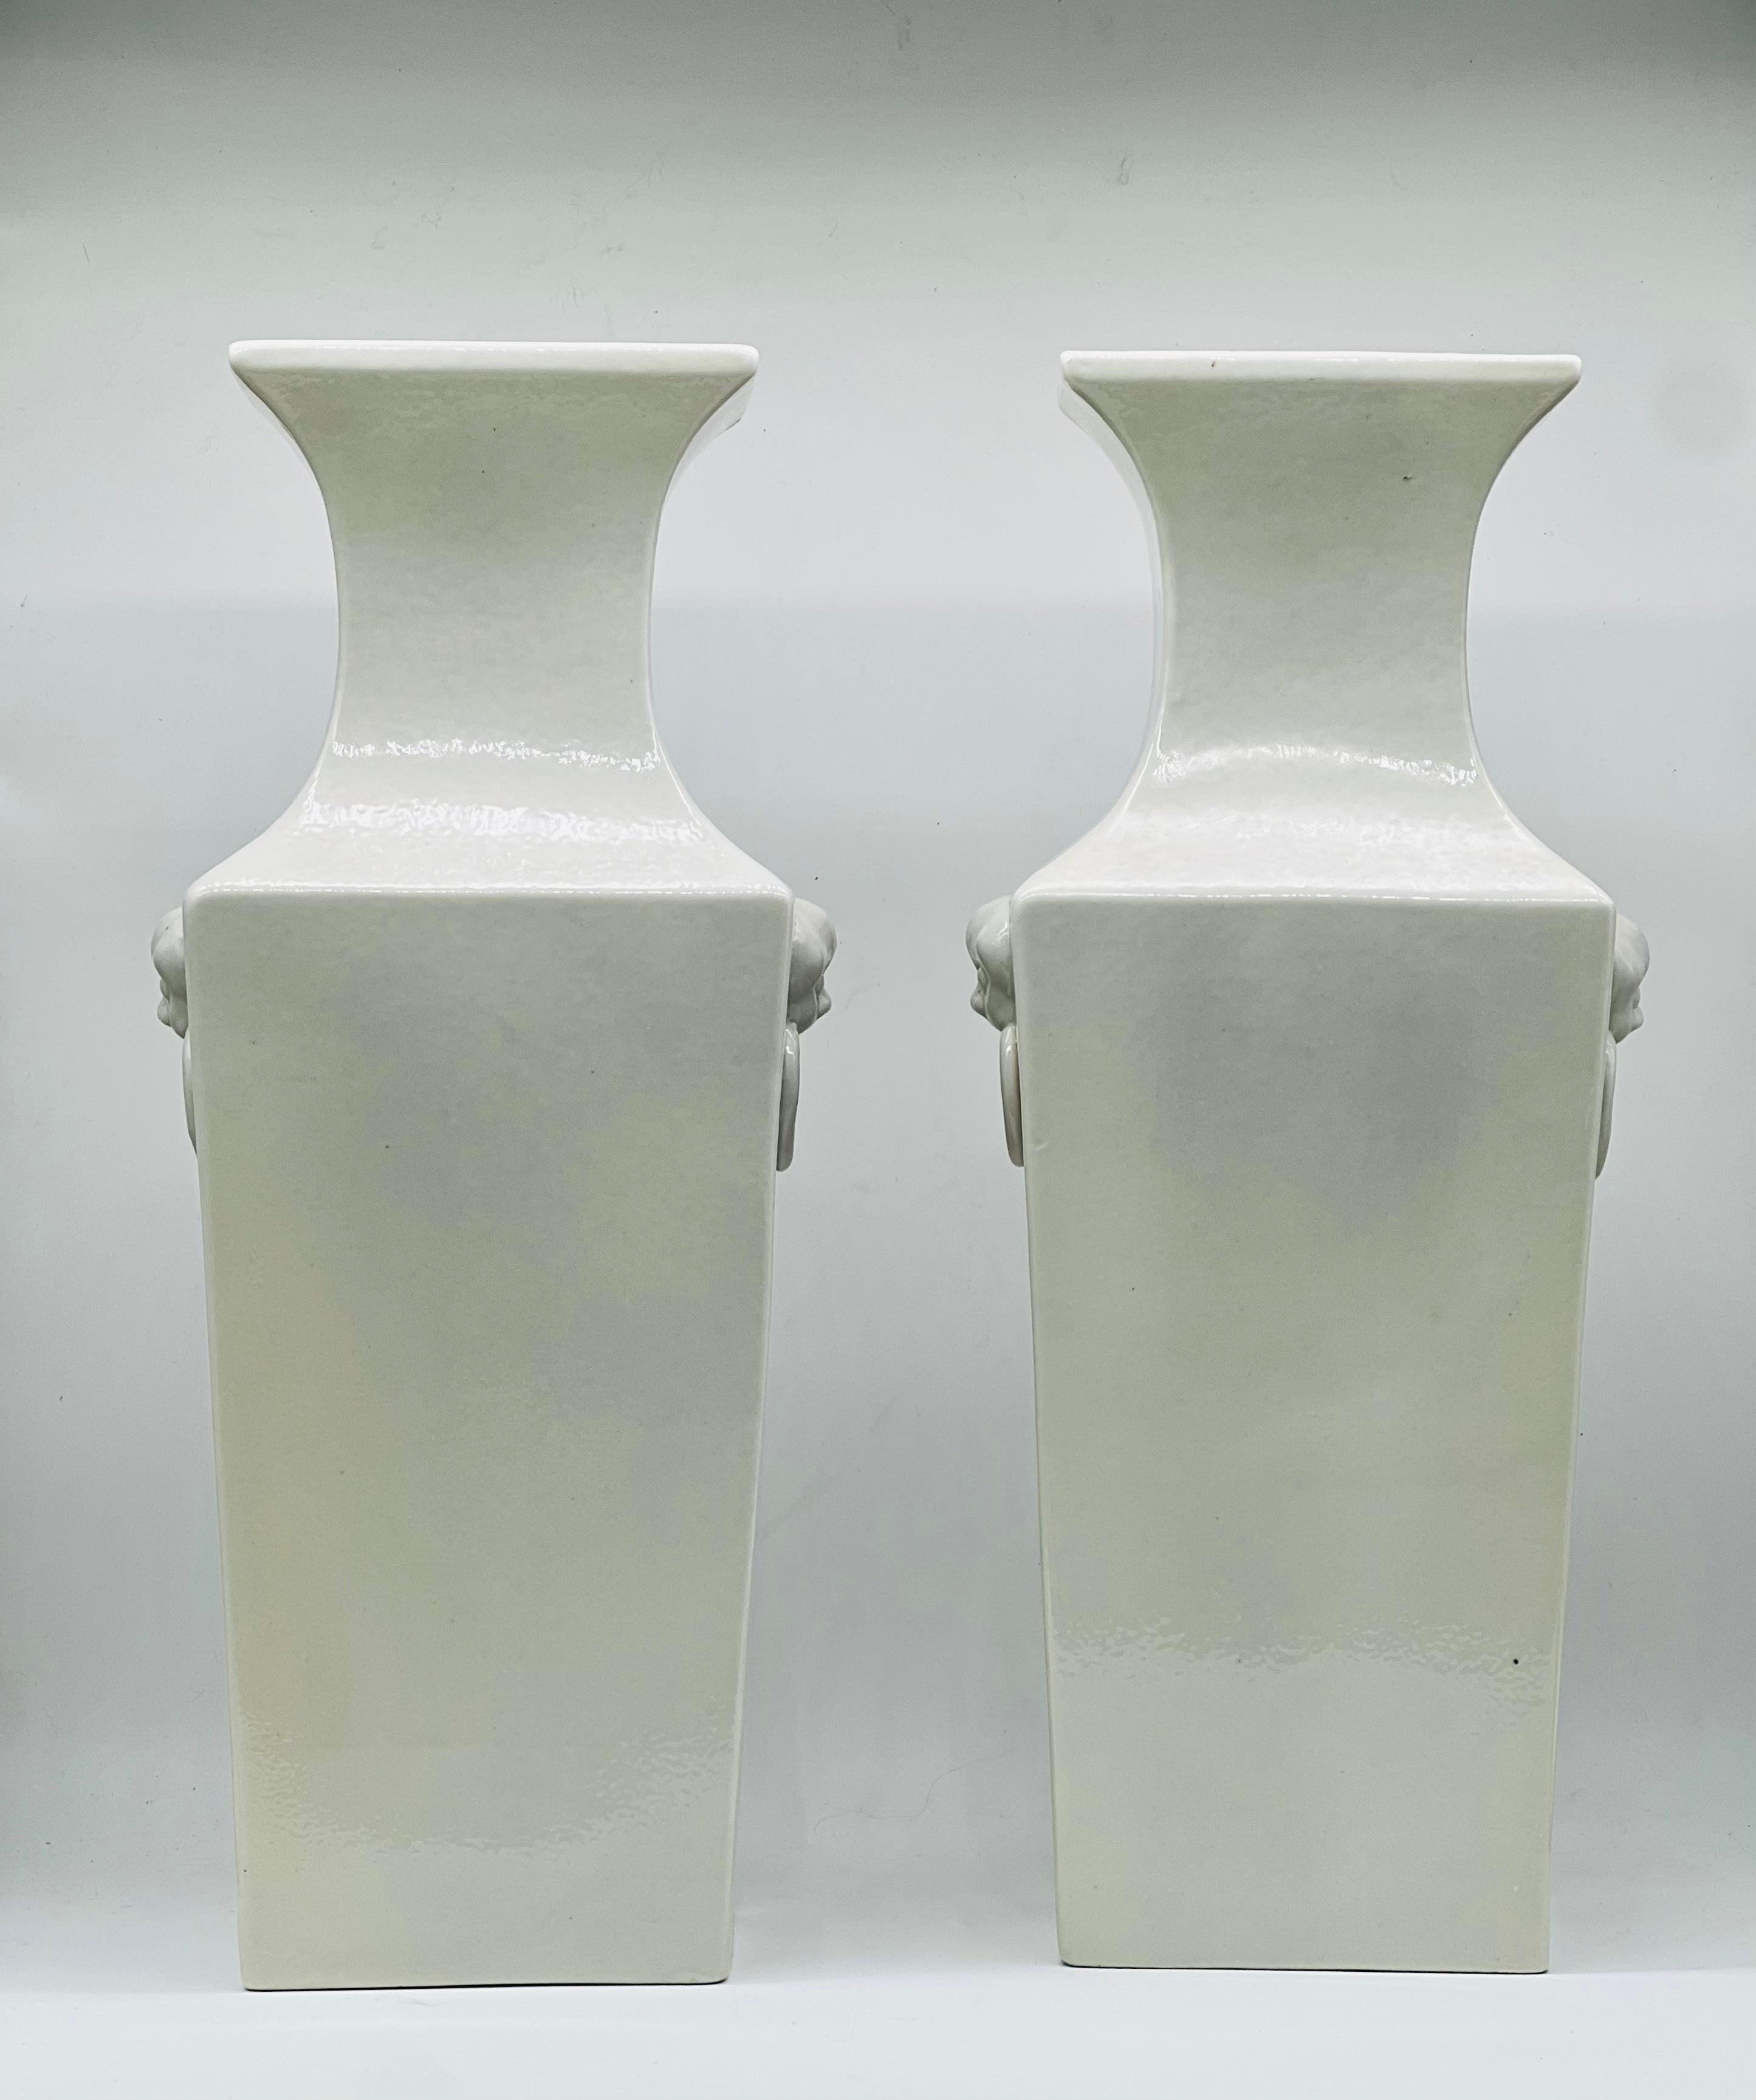 A large pair of Chinese Blanc de Chine Vases. Republic period. Early 20th C


A Fine and very large pair of Chinese blanc de chine vases dating from the early 20th C. Republic period of China. 
The tall square body has a raised mouth, two lion dog